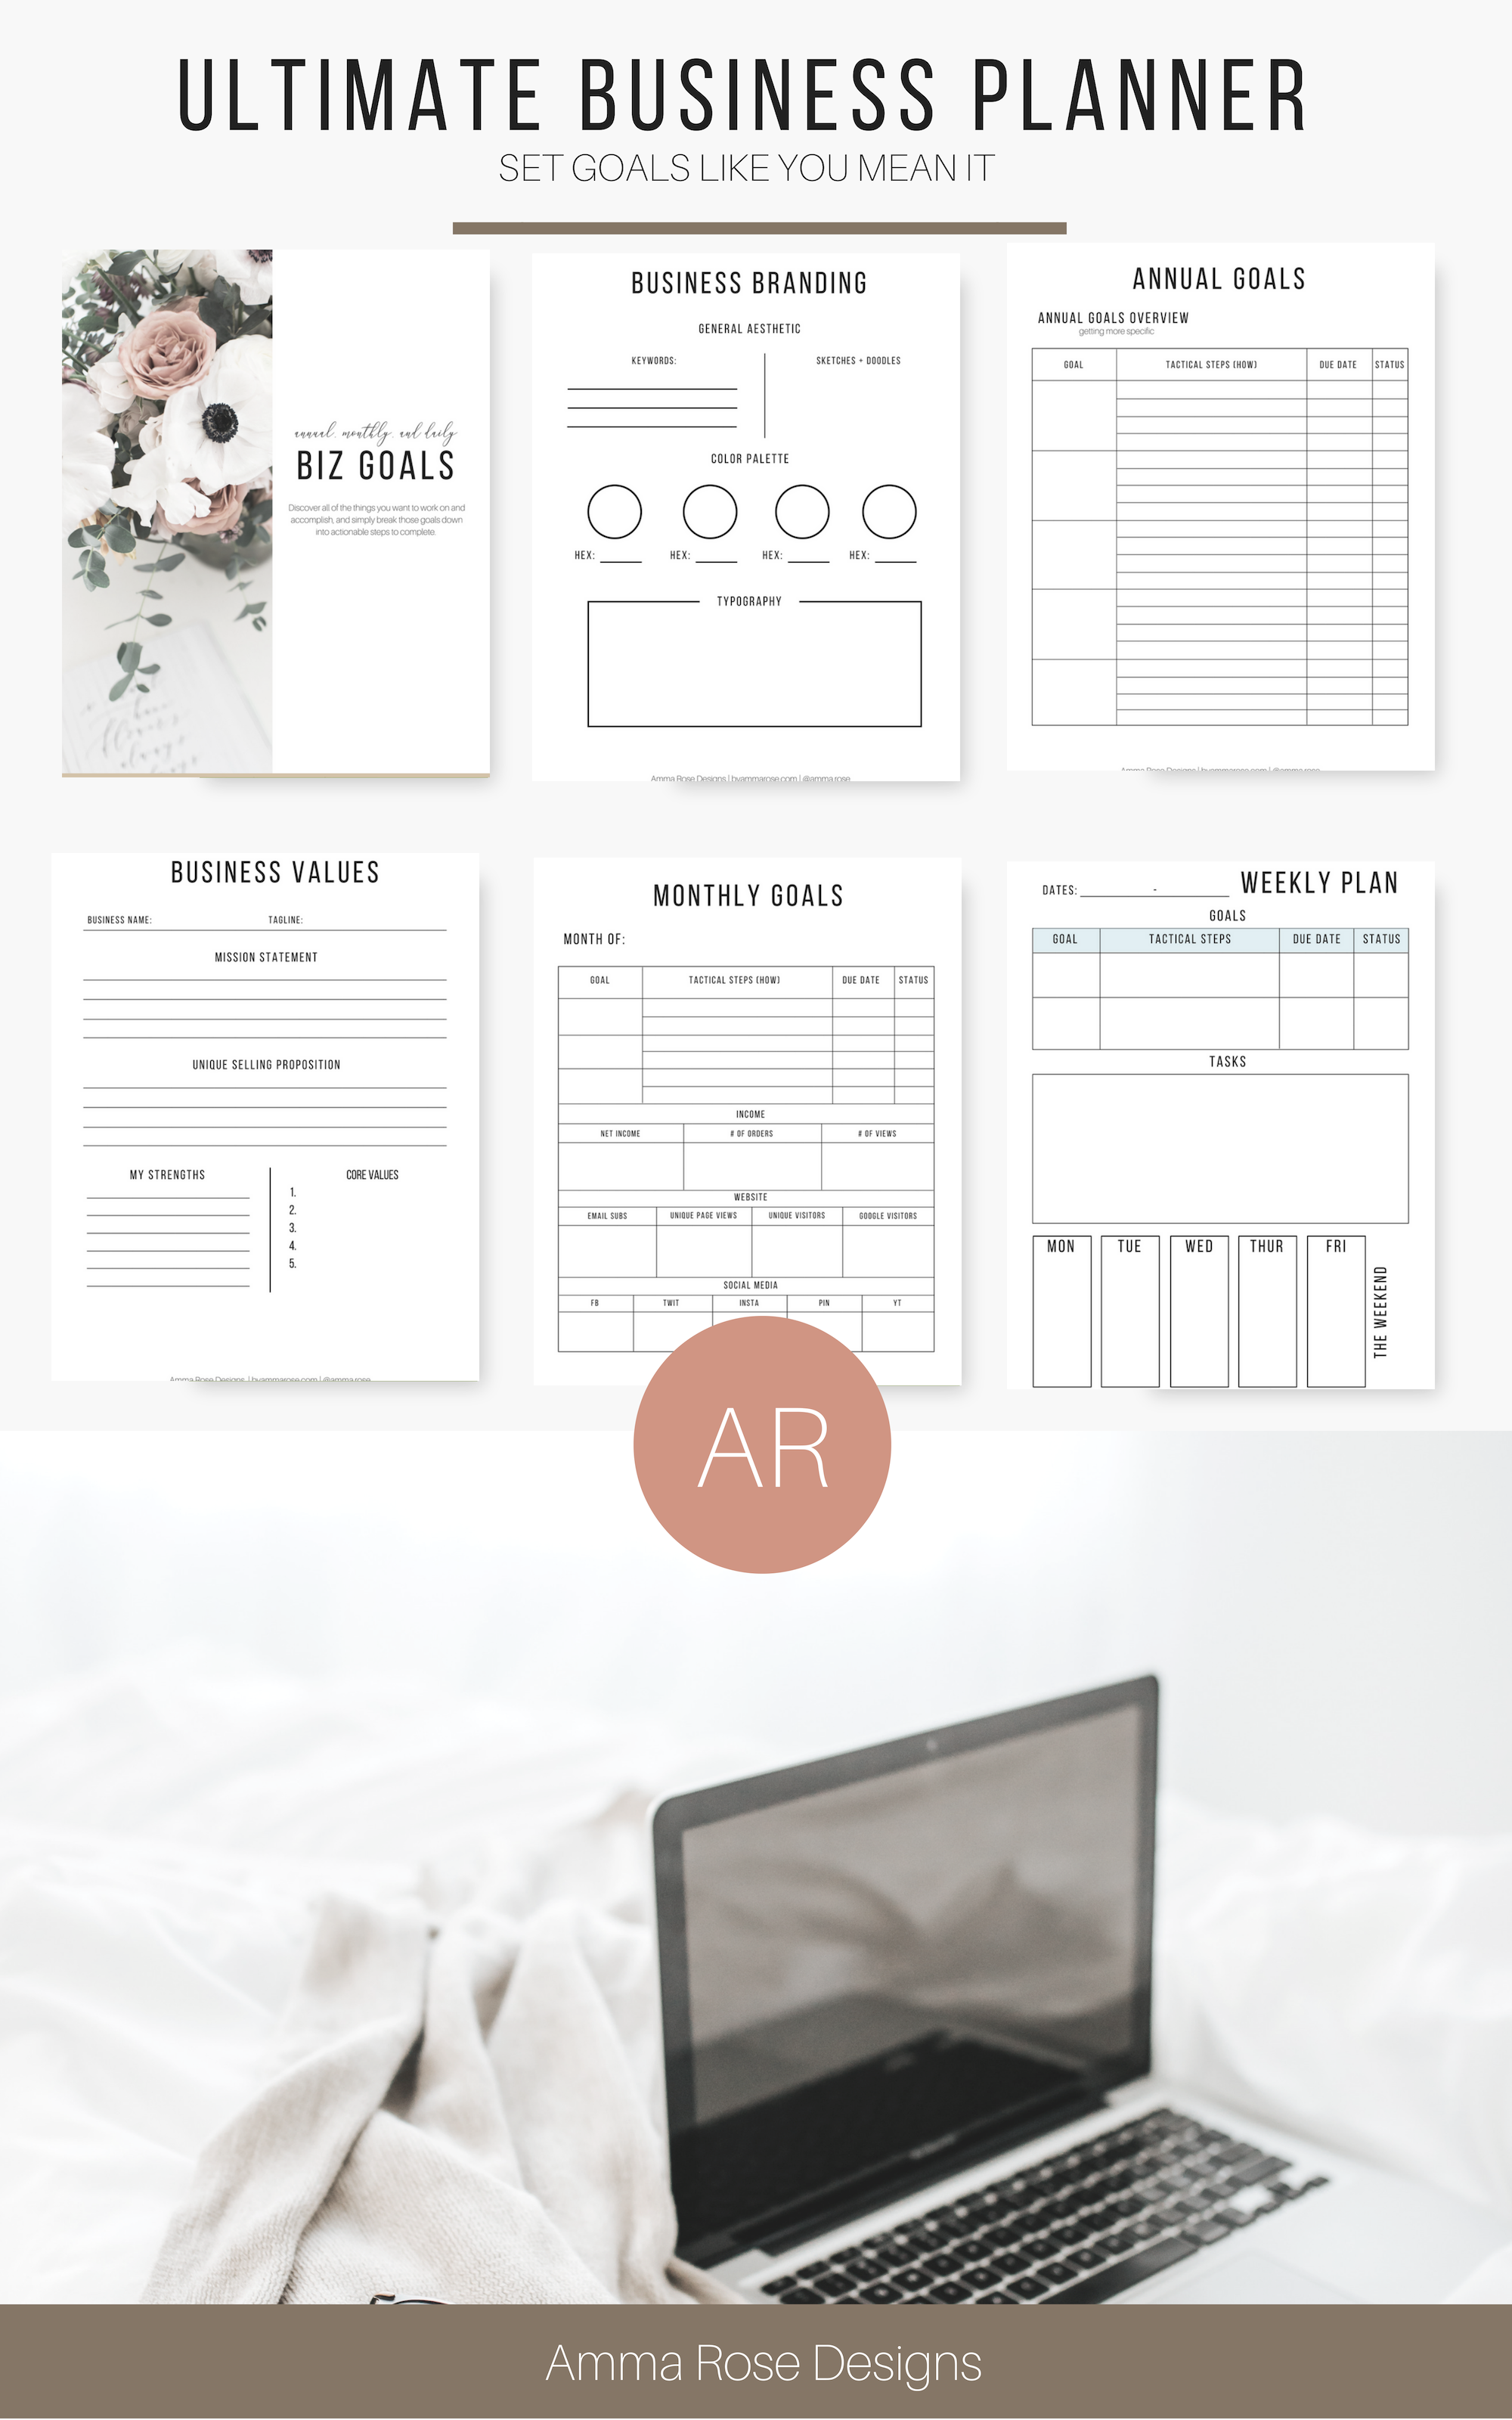 13 Event Planning Business free printable ideas